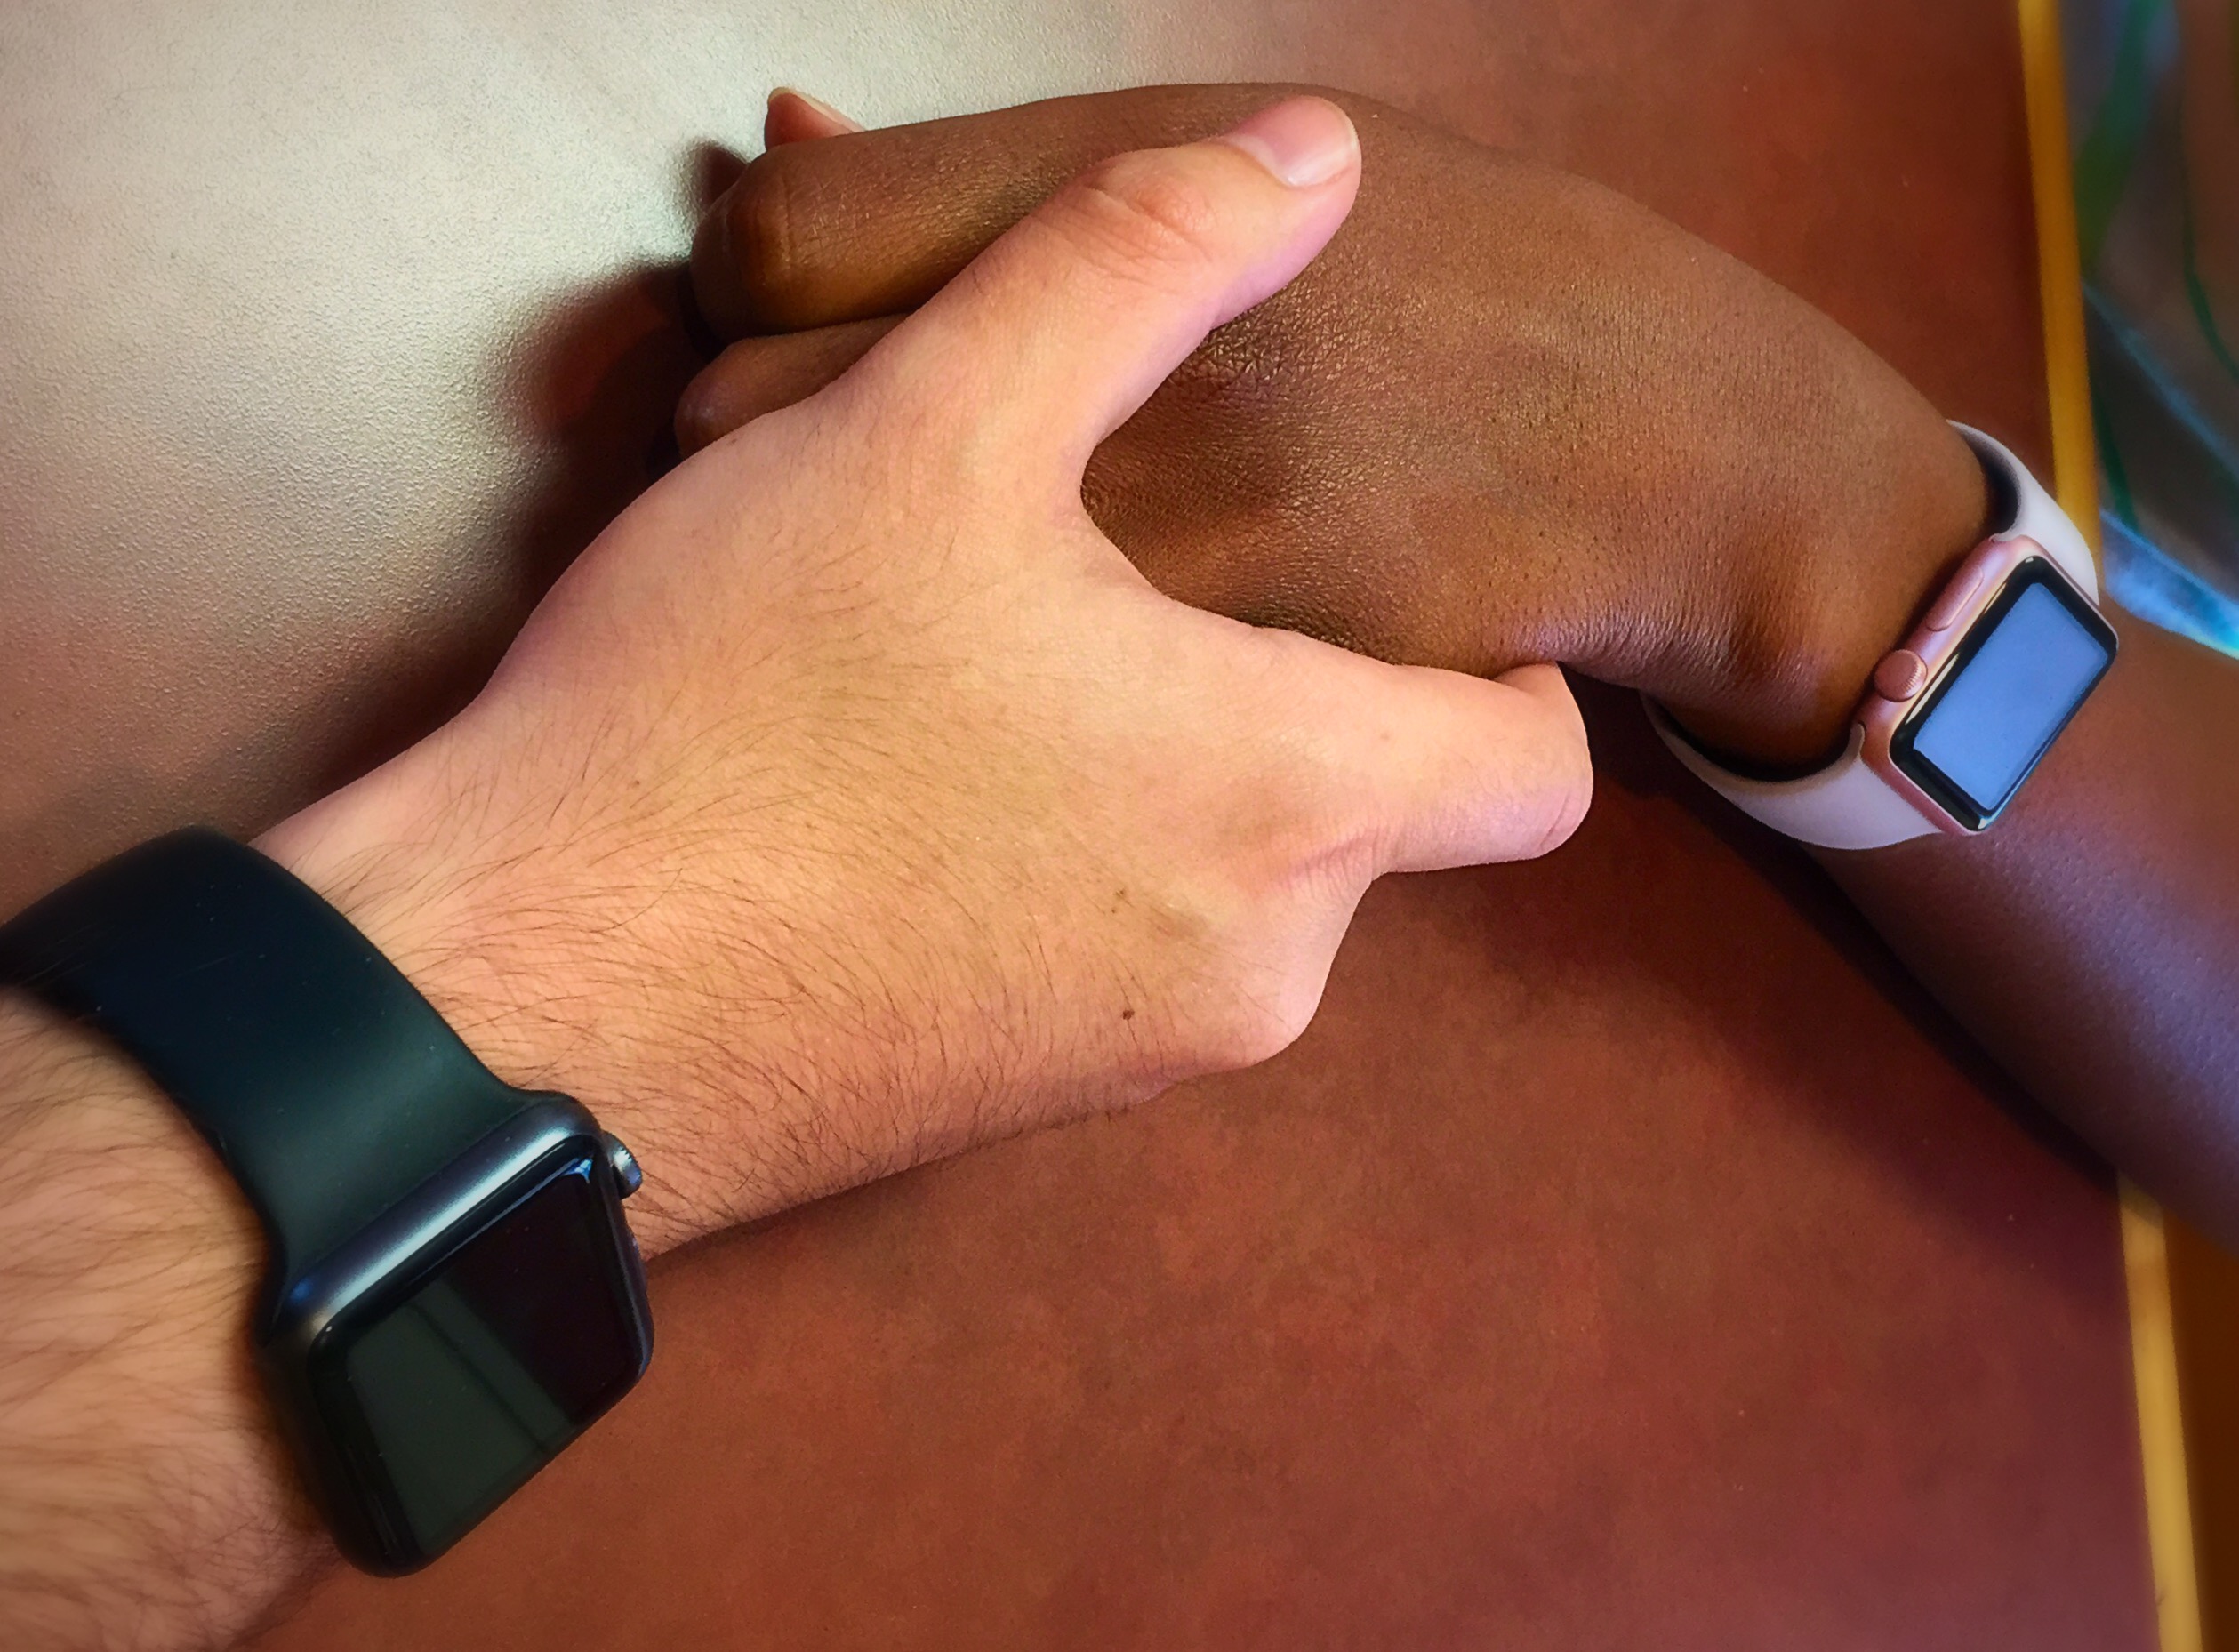 Apple Watch Is Better With Family And Friends